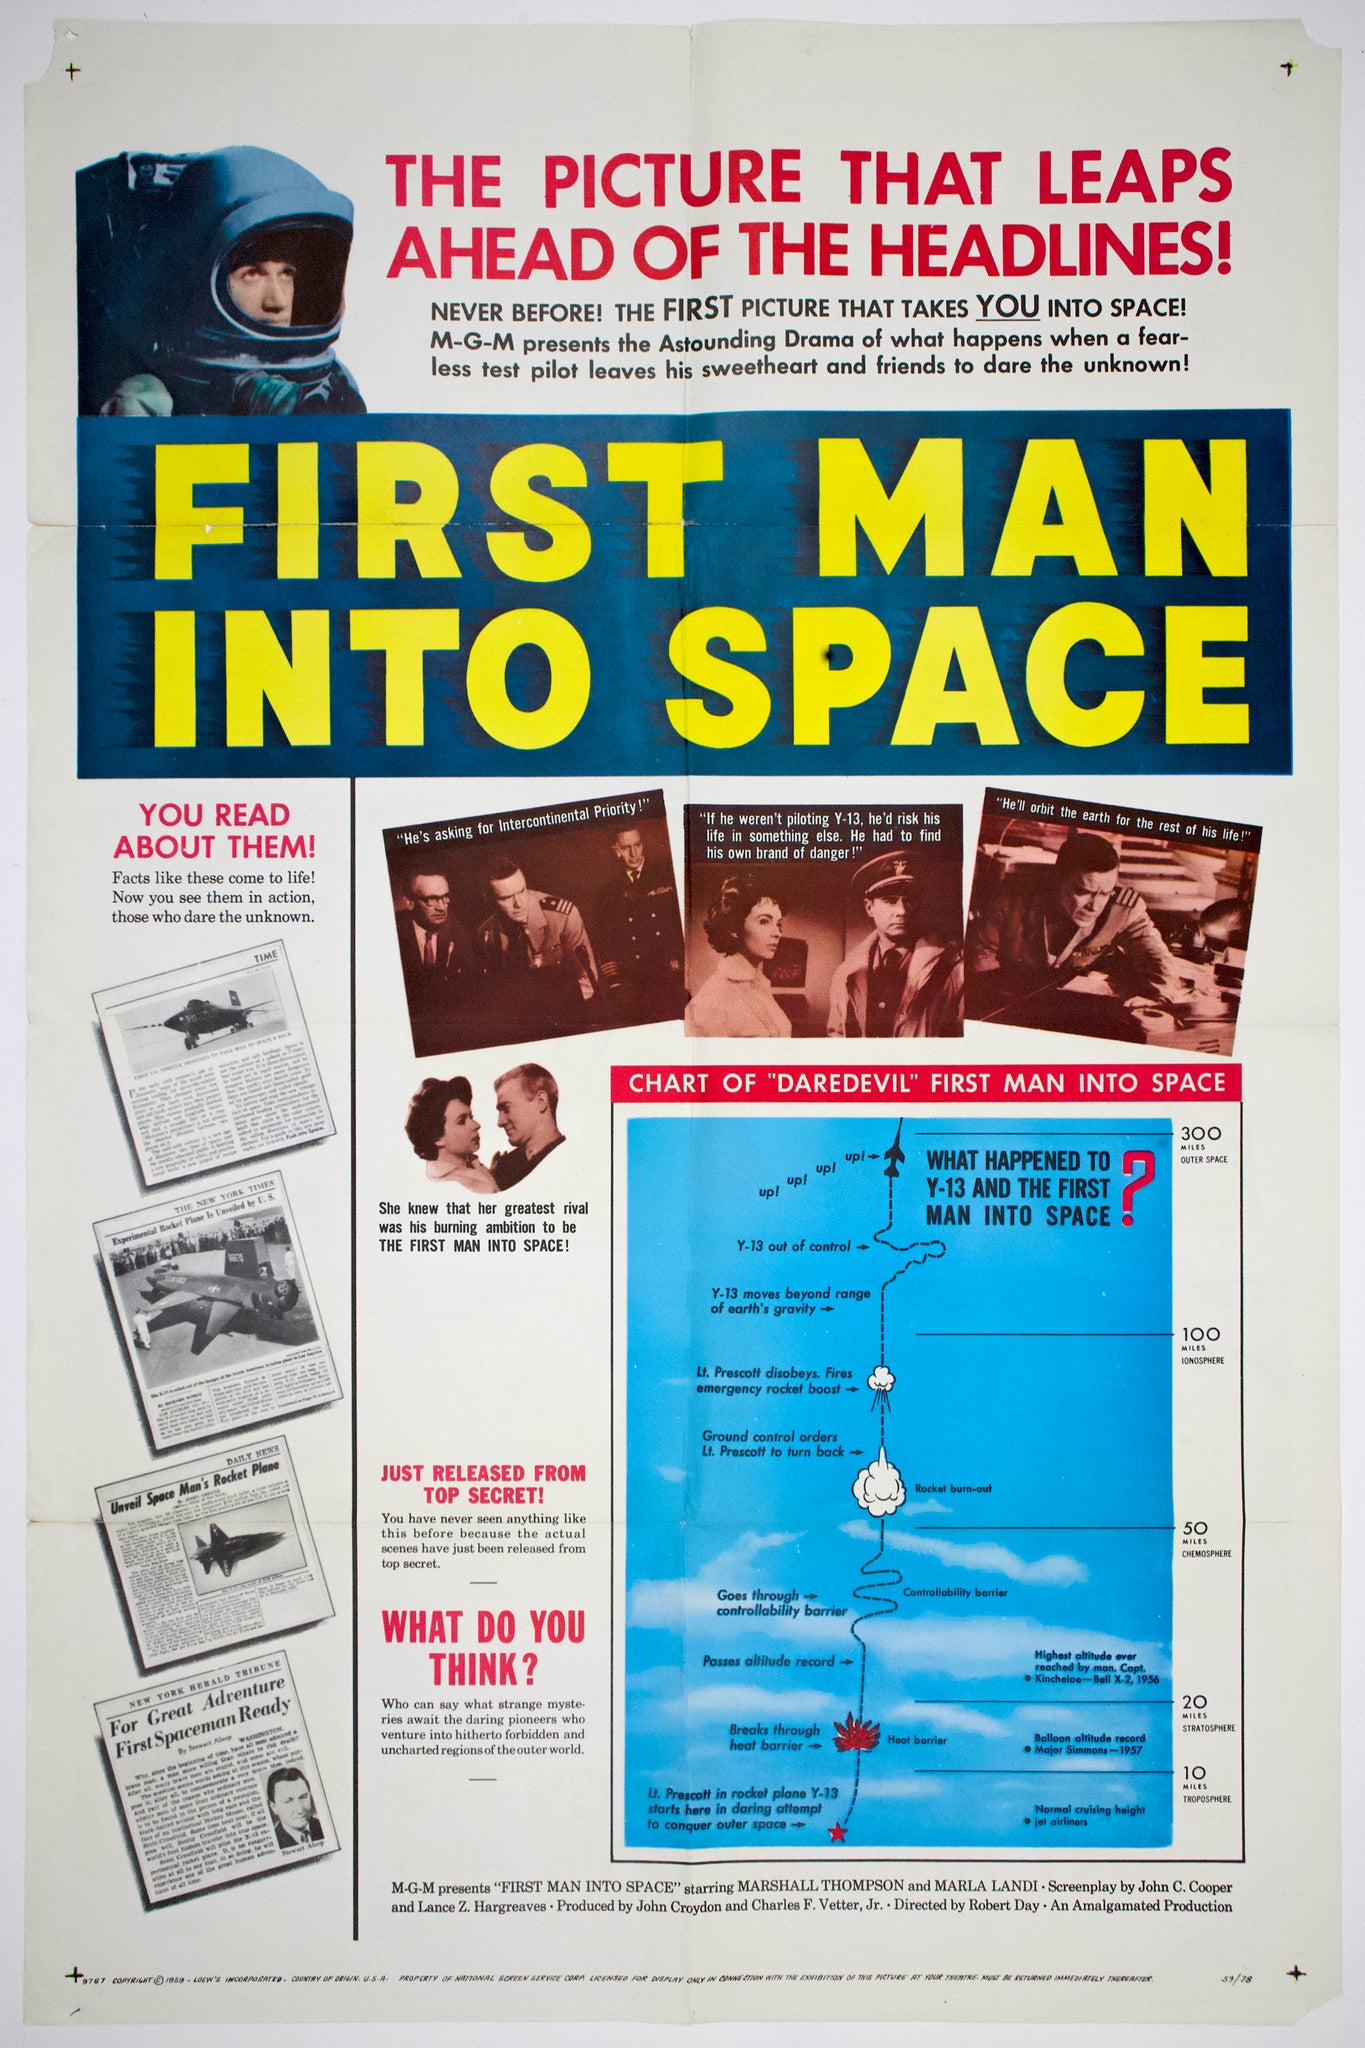 First Man Into Space (1959) US 1 Sheet Poster #New